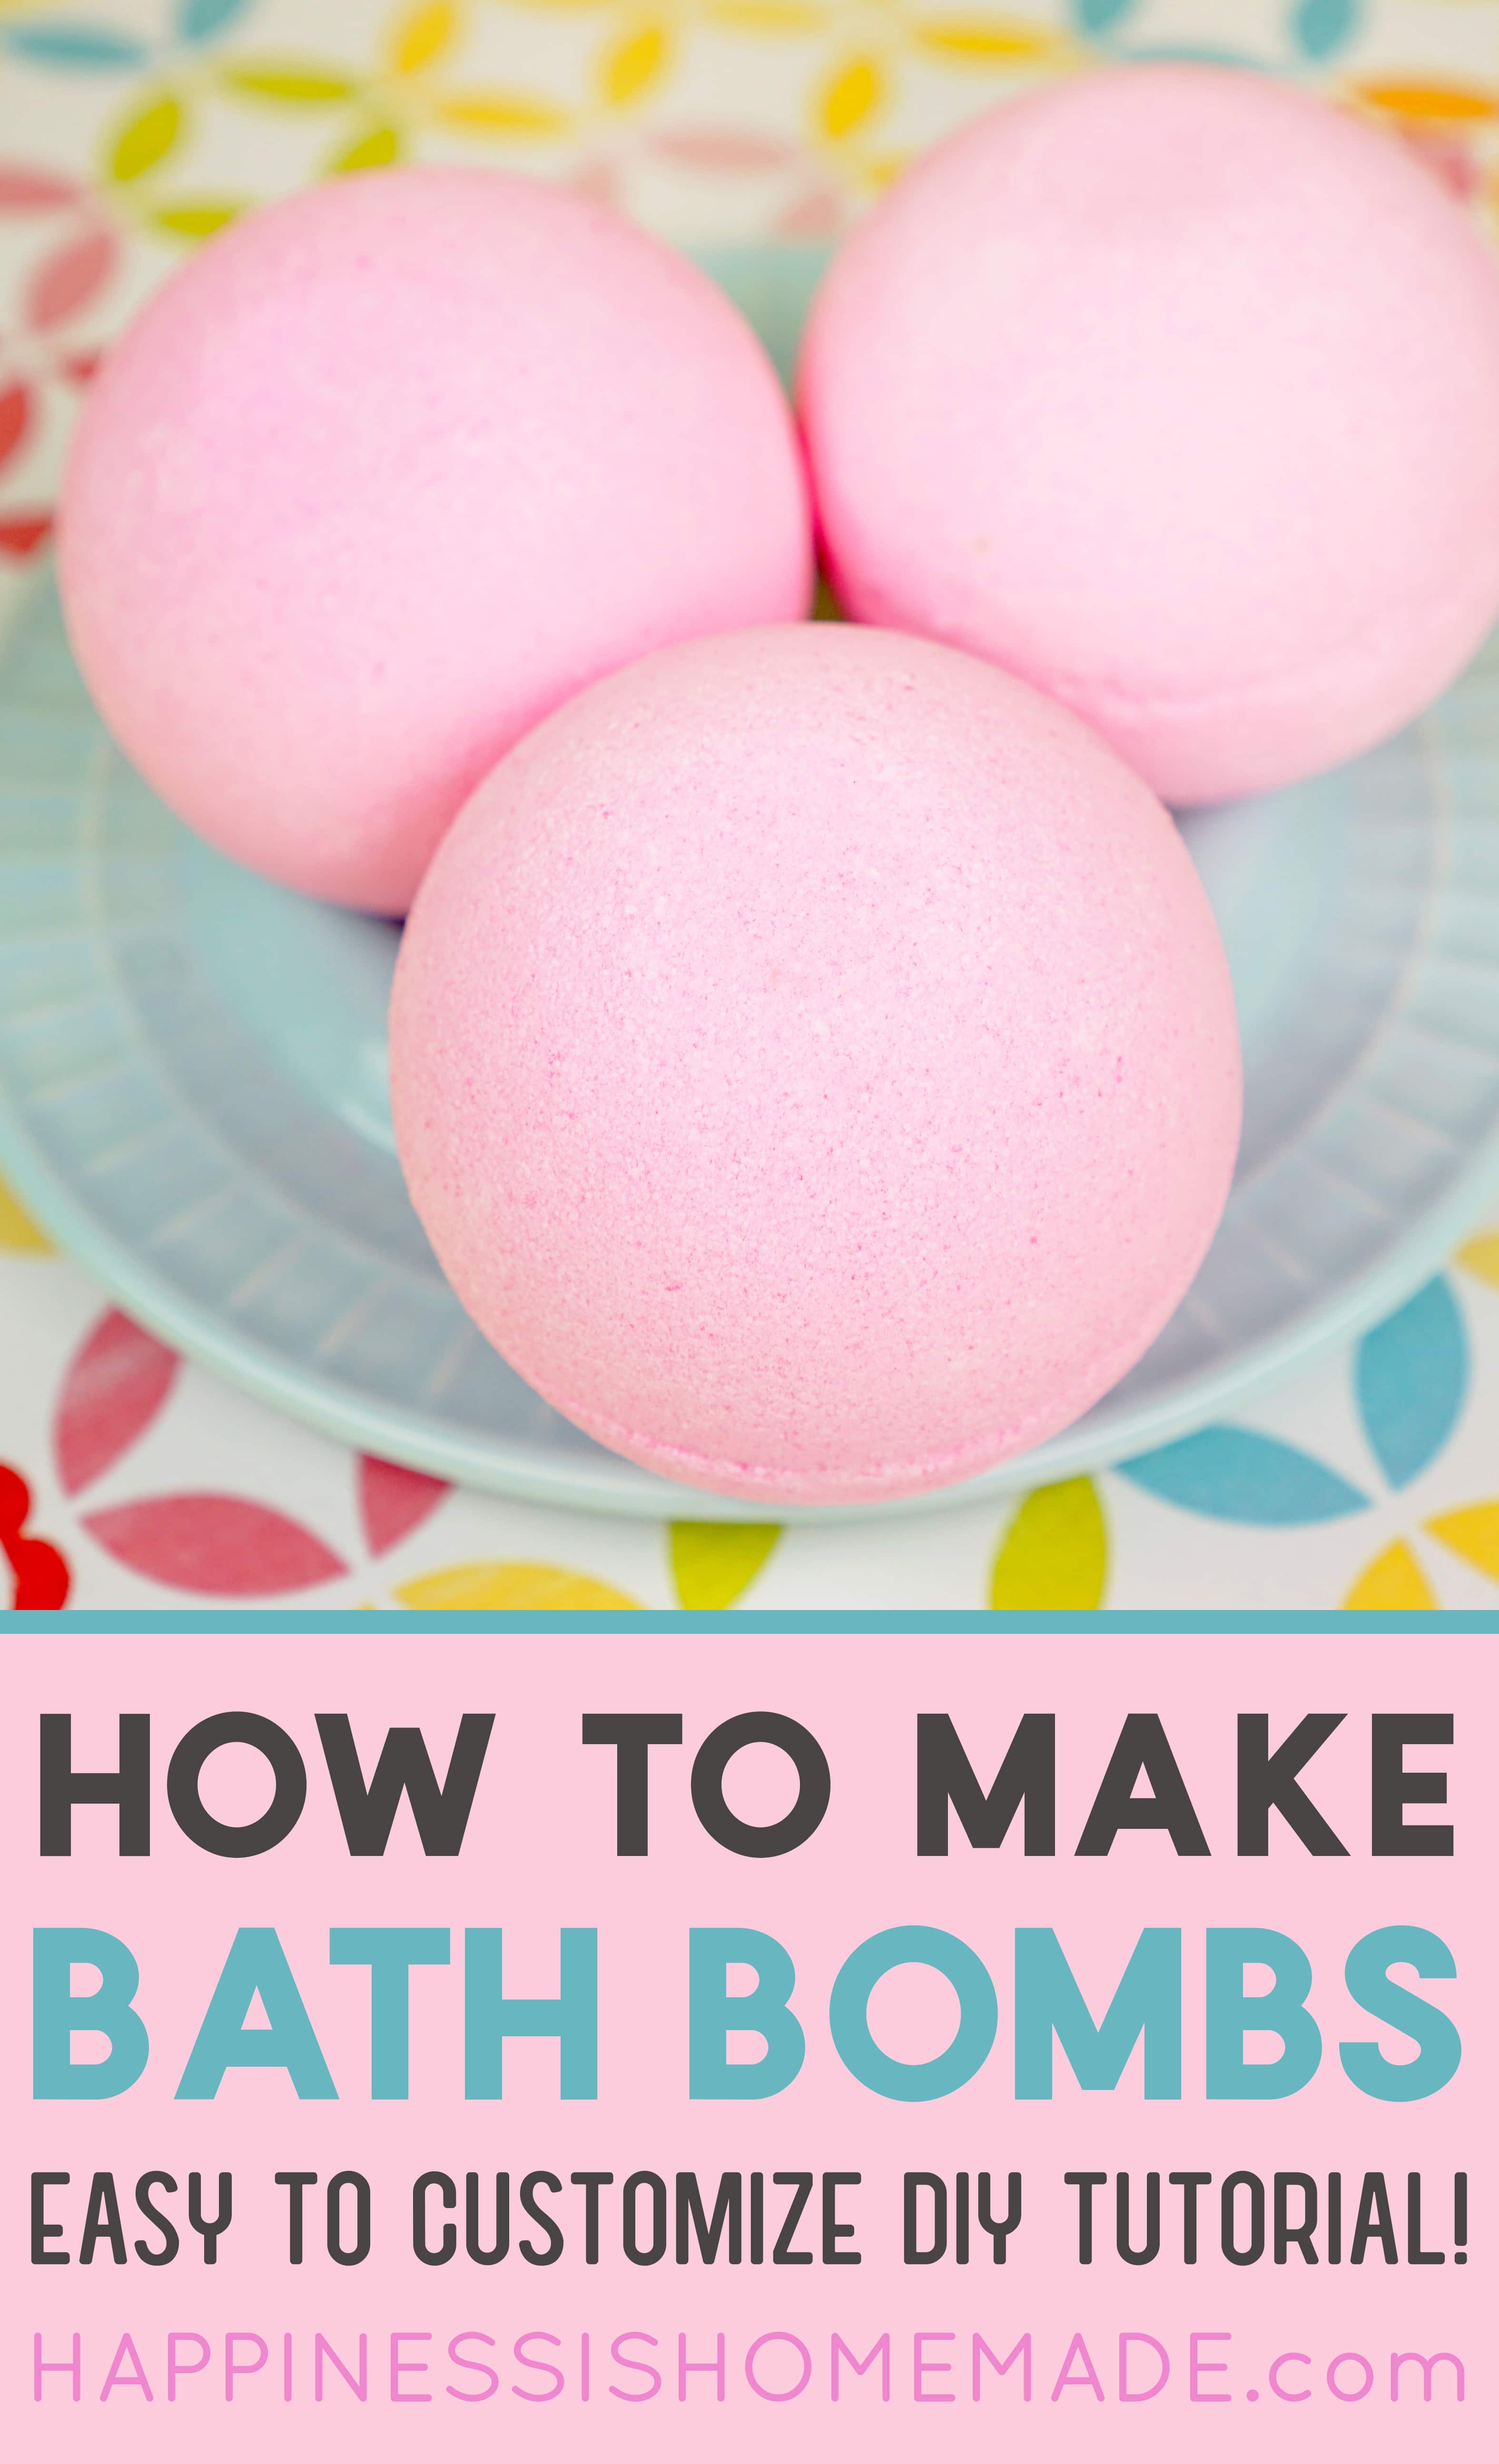 How to Make Bath Bombs - Happiness is 